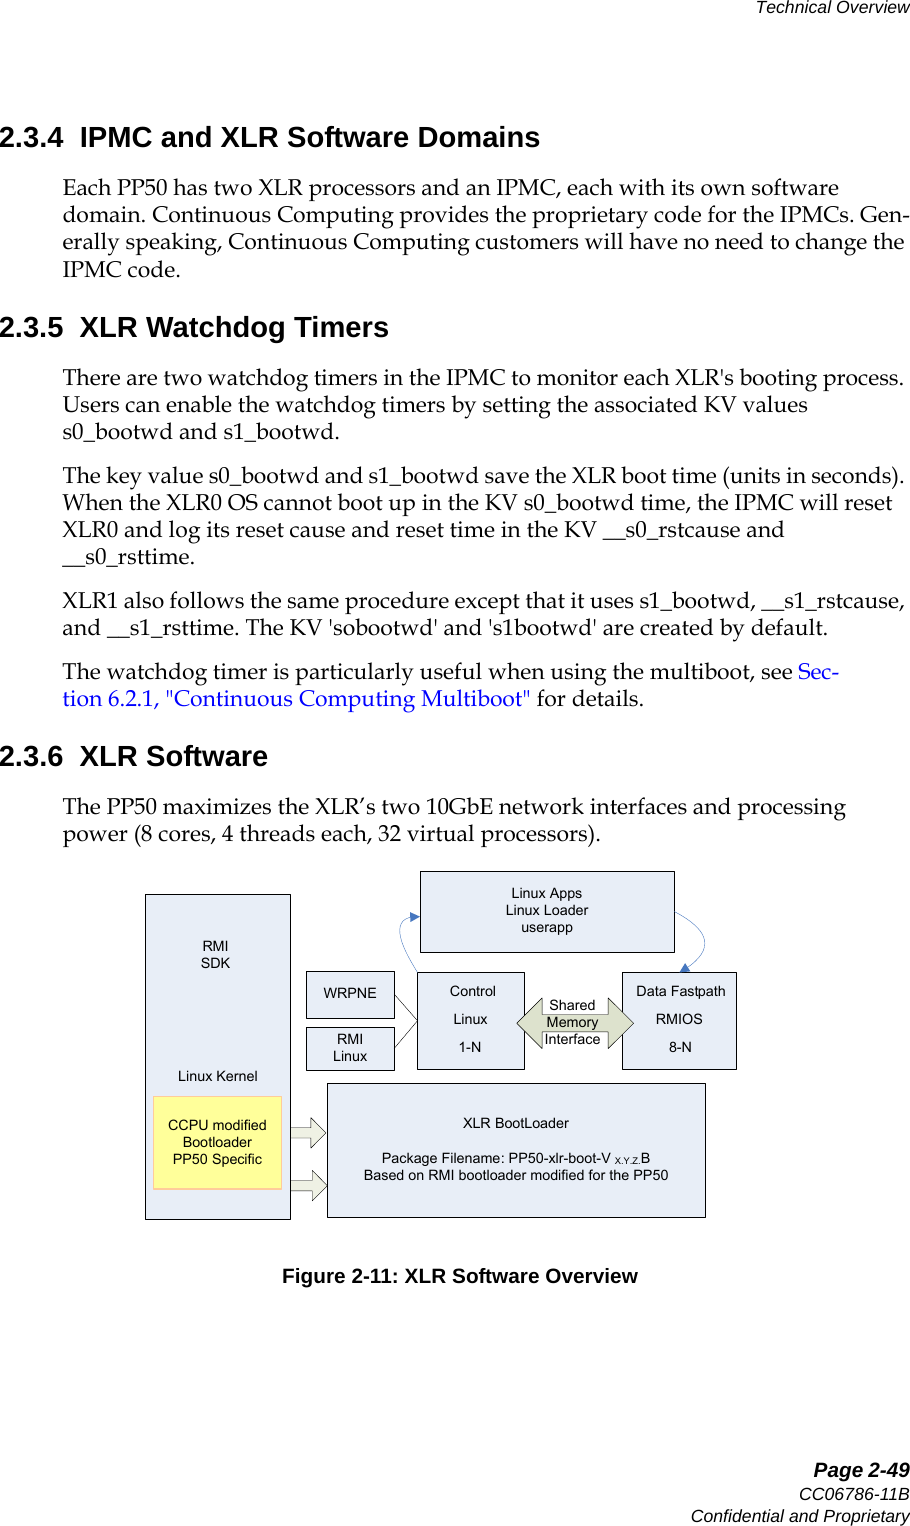   Page 2-49CC06786-11BConfidential and ProprietaryTechnical Overview14ABABPreliminary2.3.4  IPMC and XLR Software DomainsEach PP50 has two XLR processors and an IPMC, each with its own software domain. Continuous Computing provides the proprietary code for the IPMCs. Gen-erally speaking, Continuous Computing customers will have no need to change the IPMC code. 2.3.5  XLR Watchdog TimersThere are two watchdog timers in the IPMC to monitor each XLR&apos;s booting process. Users can enable the watchdog timers by setting the associated KV values s0_bootwd and s1_bootwd. The key value s0_bootwd and s1_bootwd save the XLR boot time (units in seconds). When the XLR0 OS cannot boot up in the KV s0_bootwd time, the IPMC will reset XLR0 and log its reset cause and reset time in the KV __s0_rstcause and __s0_rsttime. XLR1 also follows the same procedure except that it uses s1_bootwd, __s1_rstcause, and __s1_rsttime. The KV &apos;sobootwd&apos; and &apos;s1bootwd&apos; are created by default.The watchdog timer is particularly useful when using the multiboot, see Sec-tion6.2.1, &quot;Continuous Computing Multiboot&quot; for details.2.3.6  XLR SoftwareThe PP50 maximizes the XLR’s two 10GbE network interfaces and processing power (8 cores, 4 threads each, 32 virtual processors). Figure 2-11: XLR Software OverviewLinux RMIOSXLR BootLoaderPackage Filename: PP50-xlr-boot-V X.Y.Z.BBased on RMI bootloader modified for the PP50 RMISDKWRPNERMILinux 1-N                                               8-NControl                                   Data FastpathLinux KernelCCPU modified BootloaderPP50 SpecificShared Memory InterfaceLinux AppsLinux Loaderuserapp